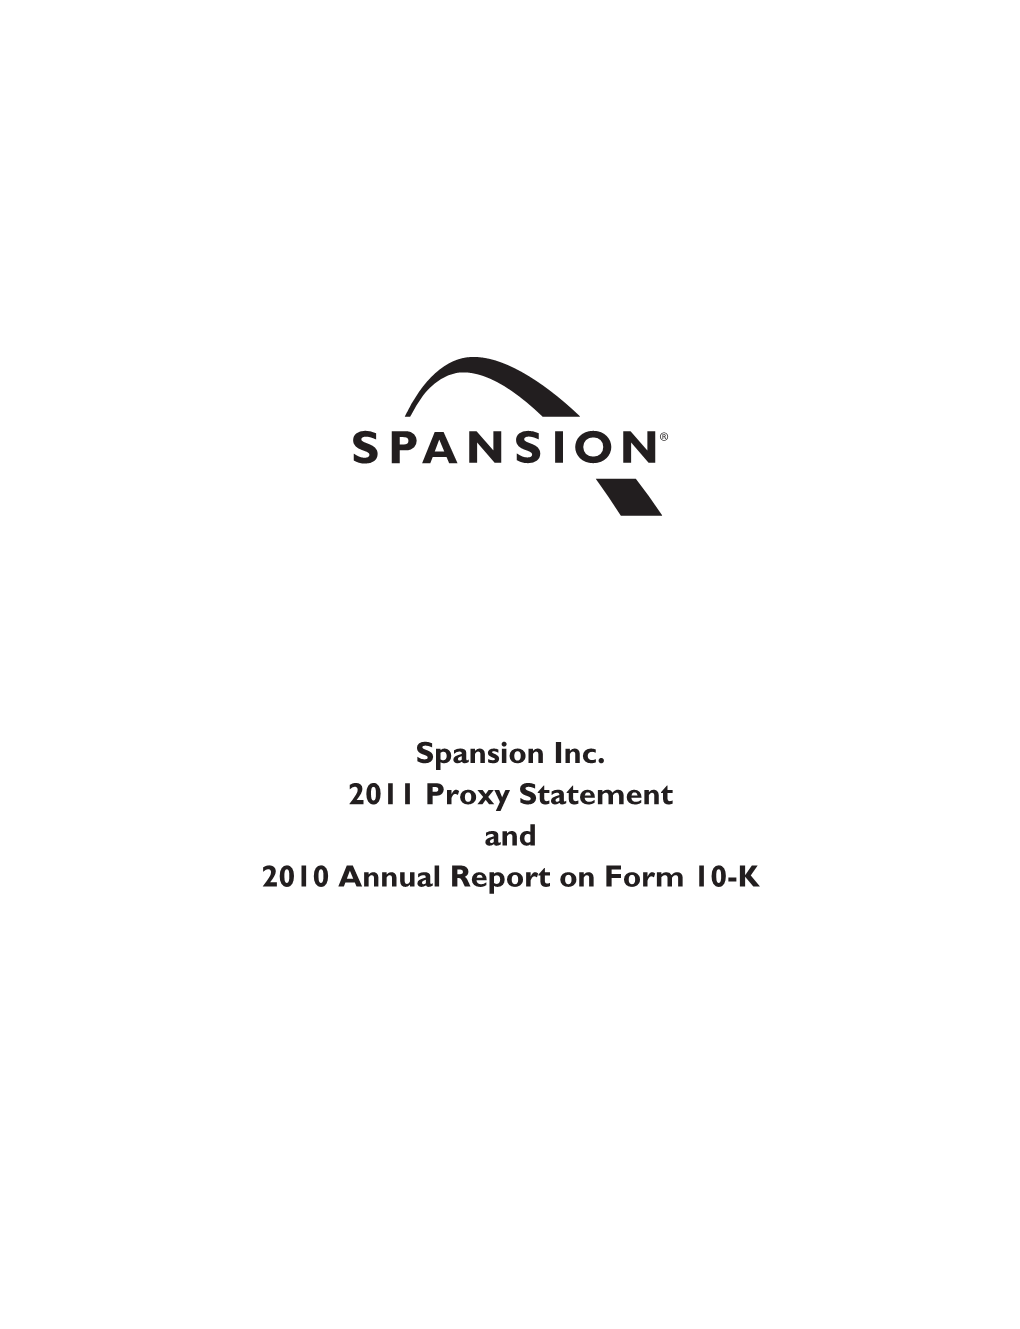 Spansion Inc. 2011 Proxy Statement and 2010 Annual Report on Form 10-K